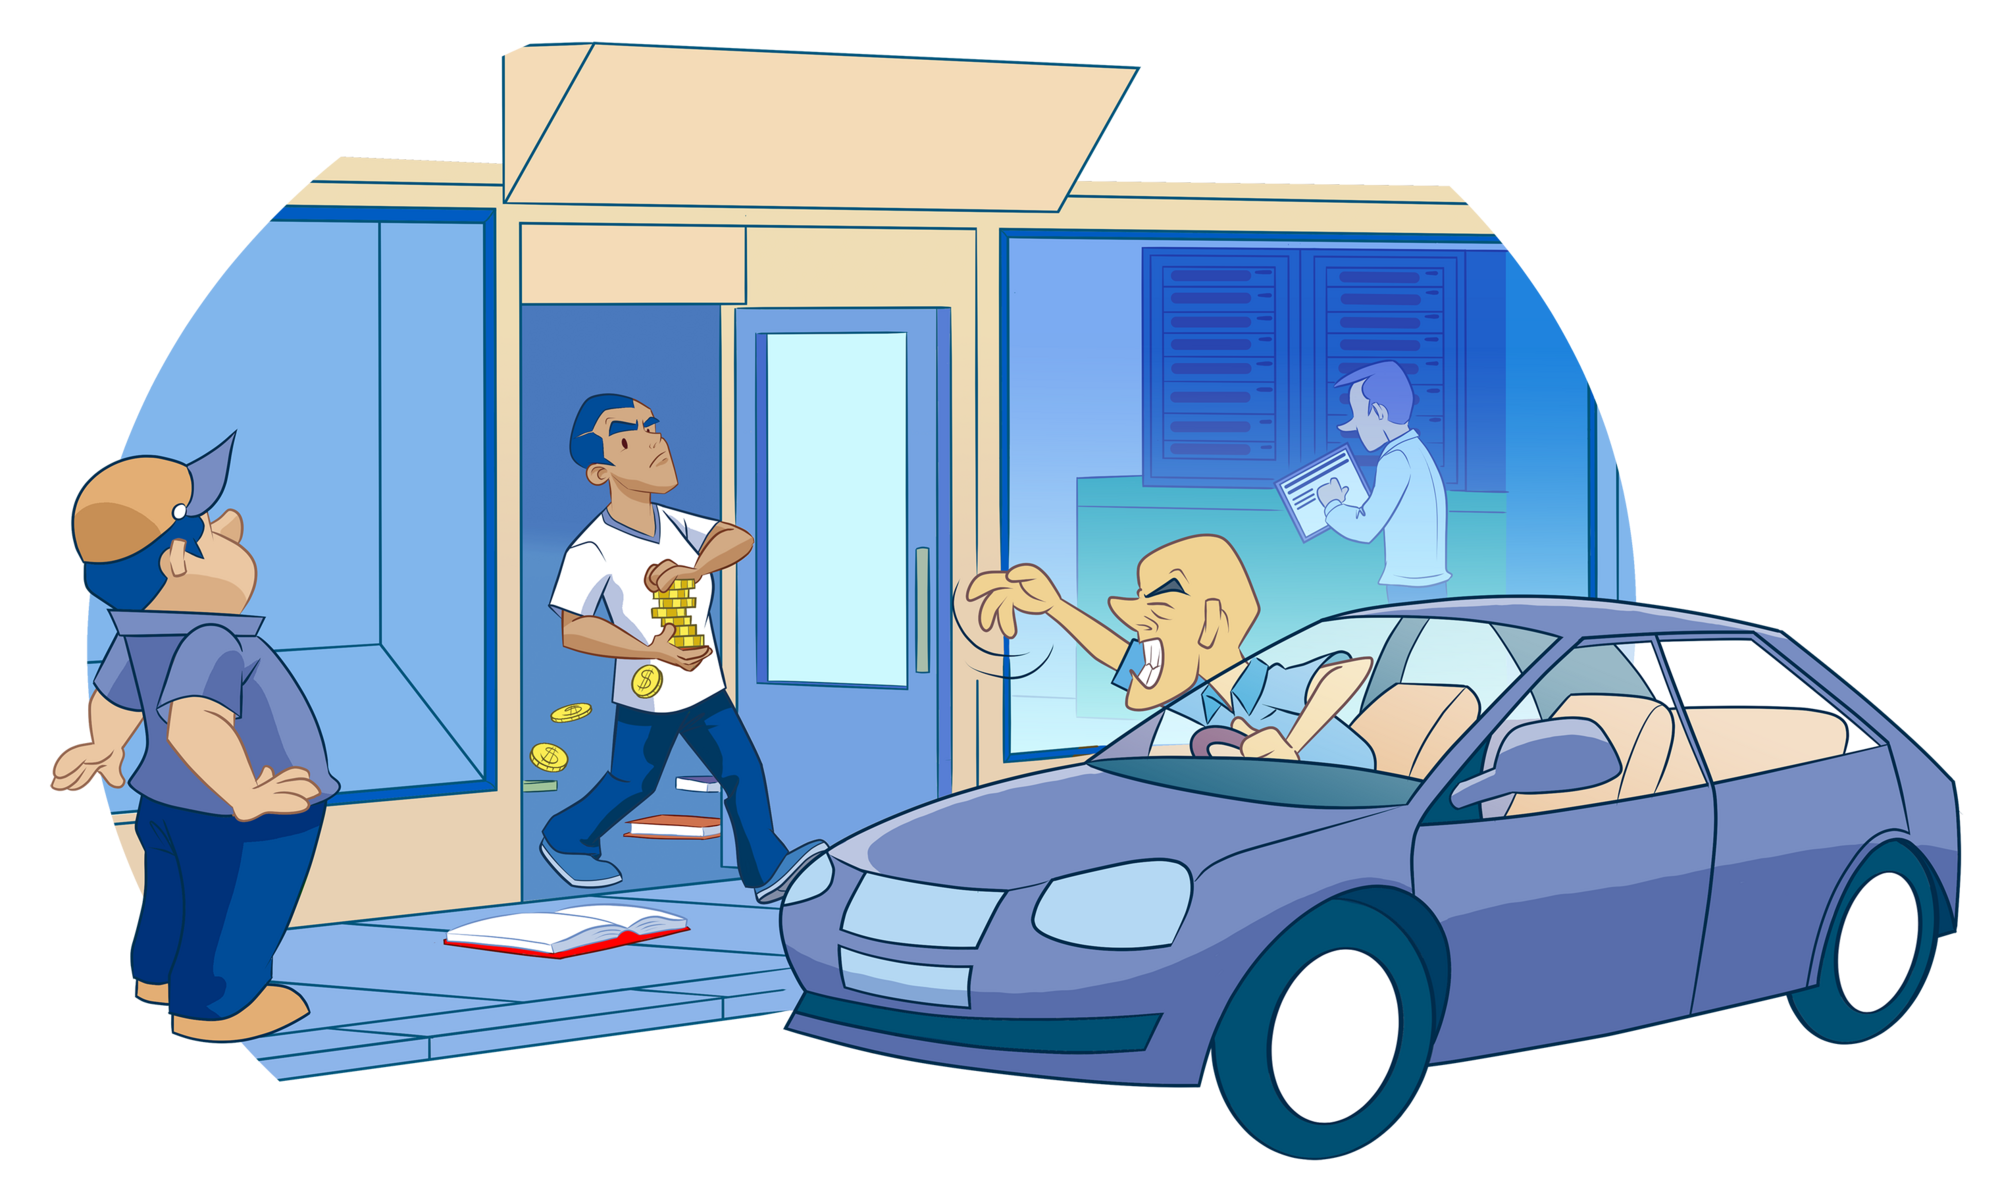 A robbery – one is hacking the server, second is counting the gold coins, third is following the schedule and fourth is waving them from the car to hurry up